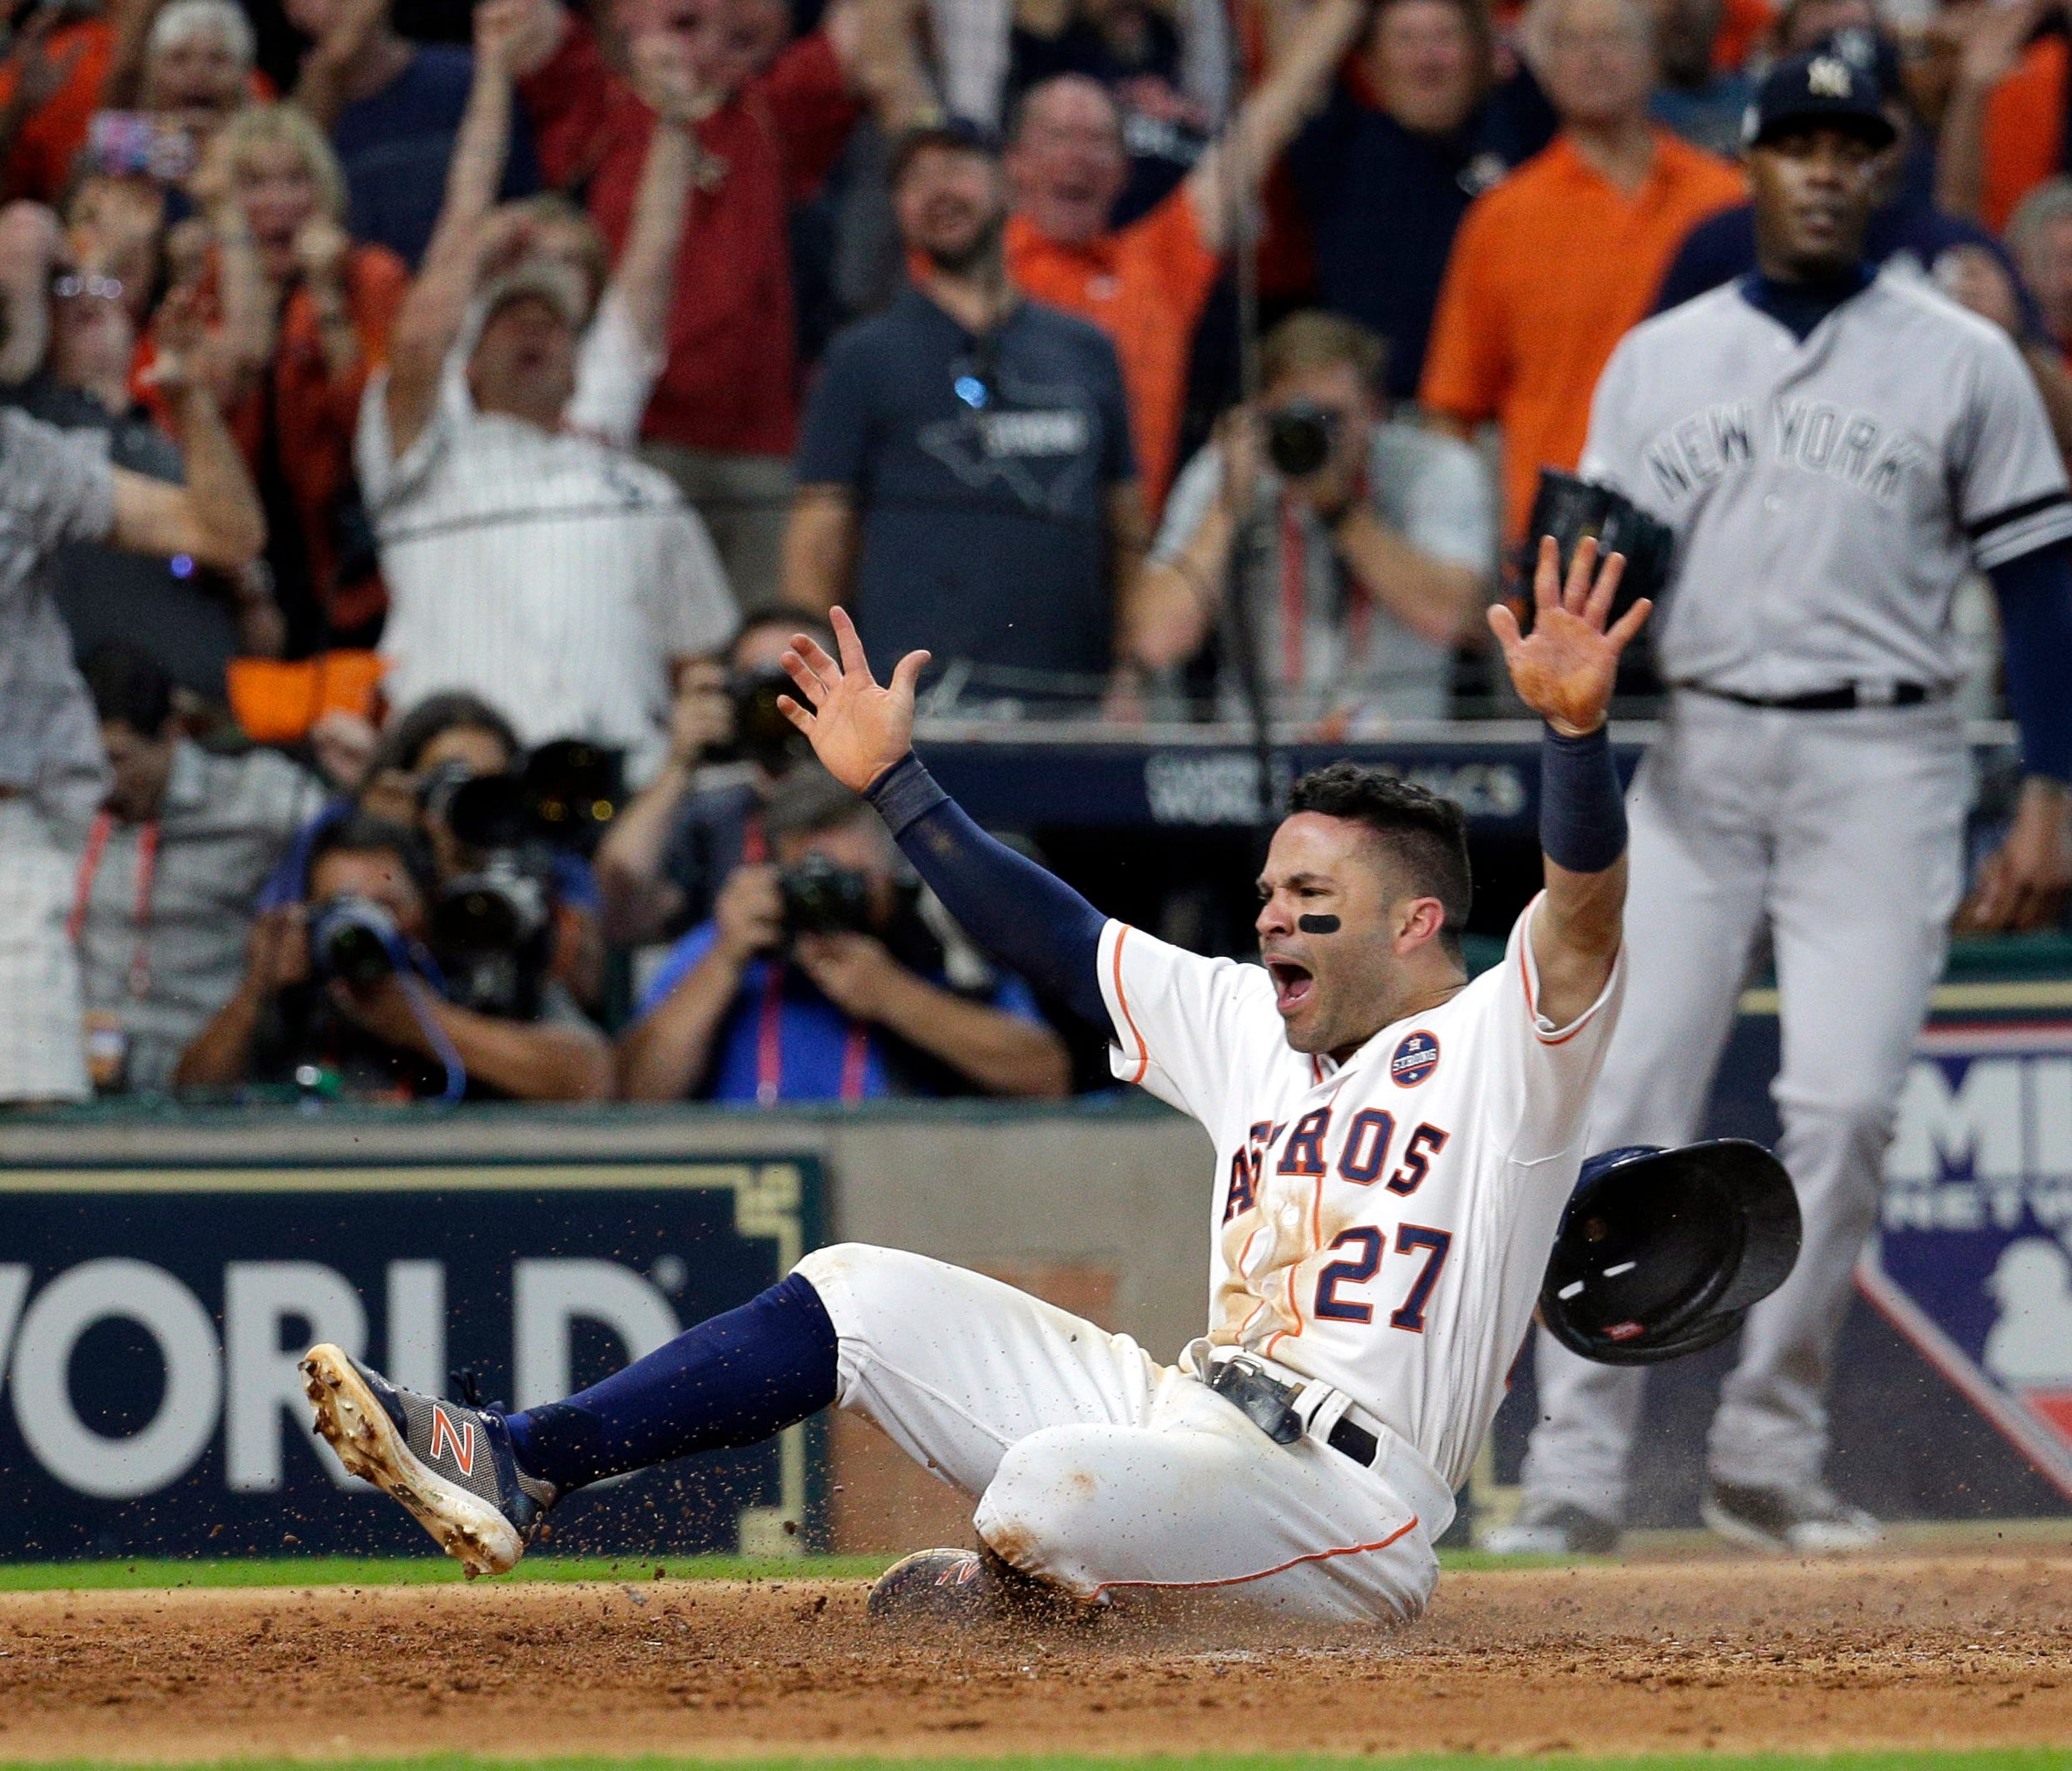 Jose Altuve exults after scoring the go-ahead run in Saturday's ALCS Game 2.